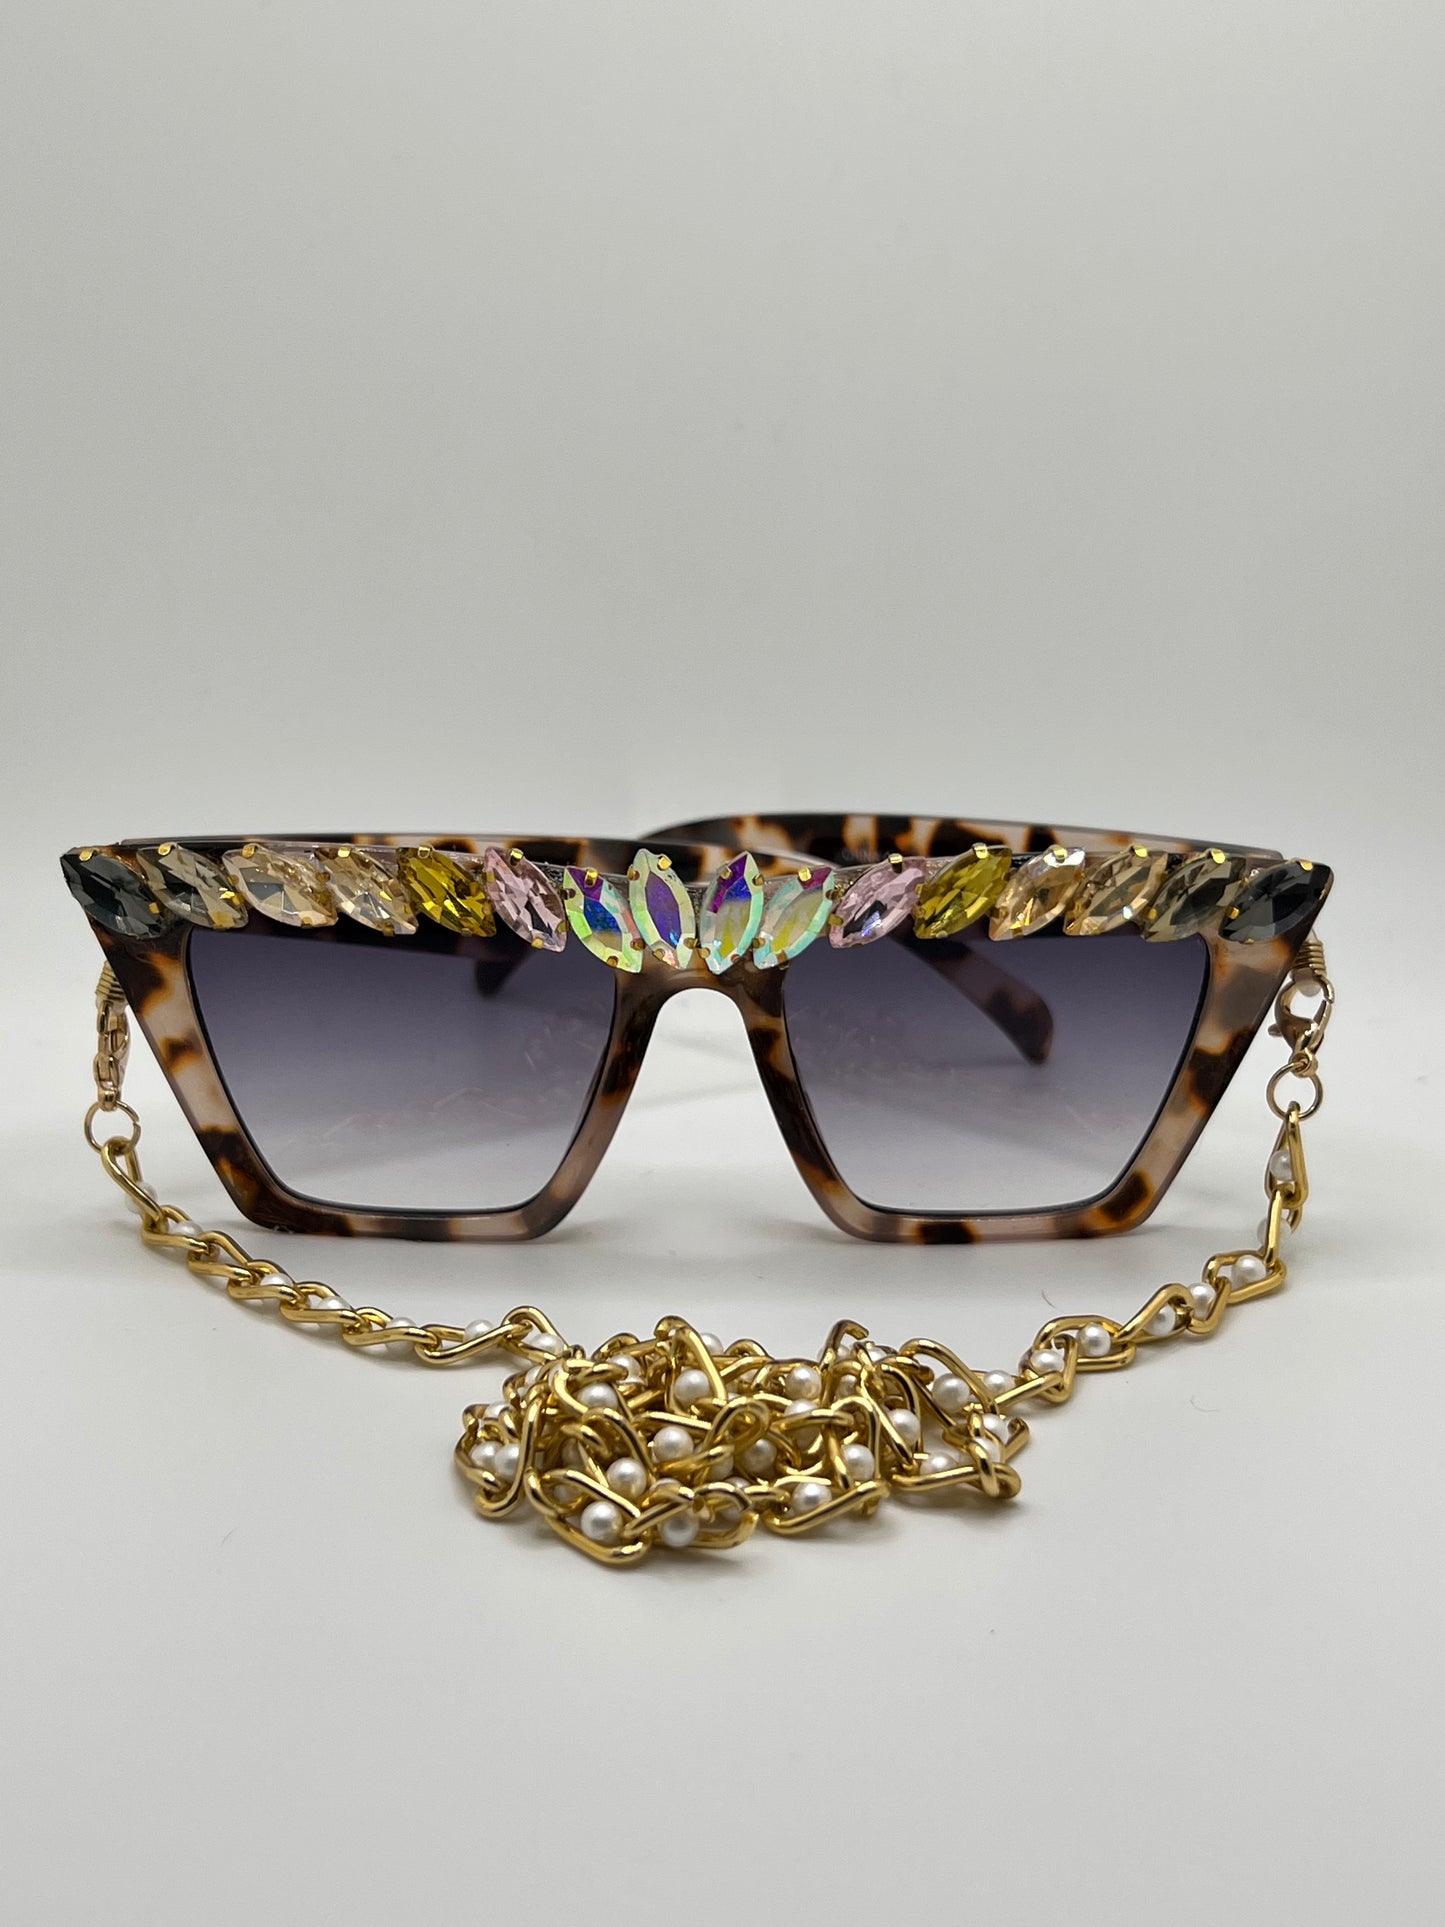 These marbled cat-eye frames sparkle with pearl and neutral rhinestones. They are the perfect bridal accent or music festival companion. They also come with a removable gold and pearl eyewear chain.